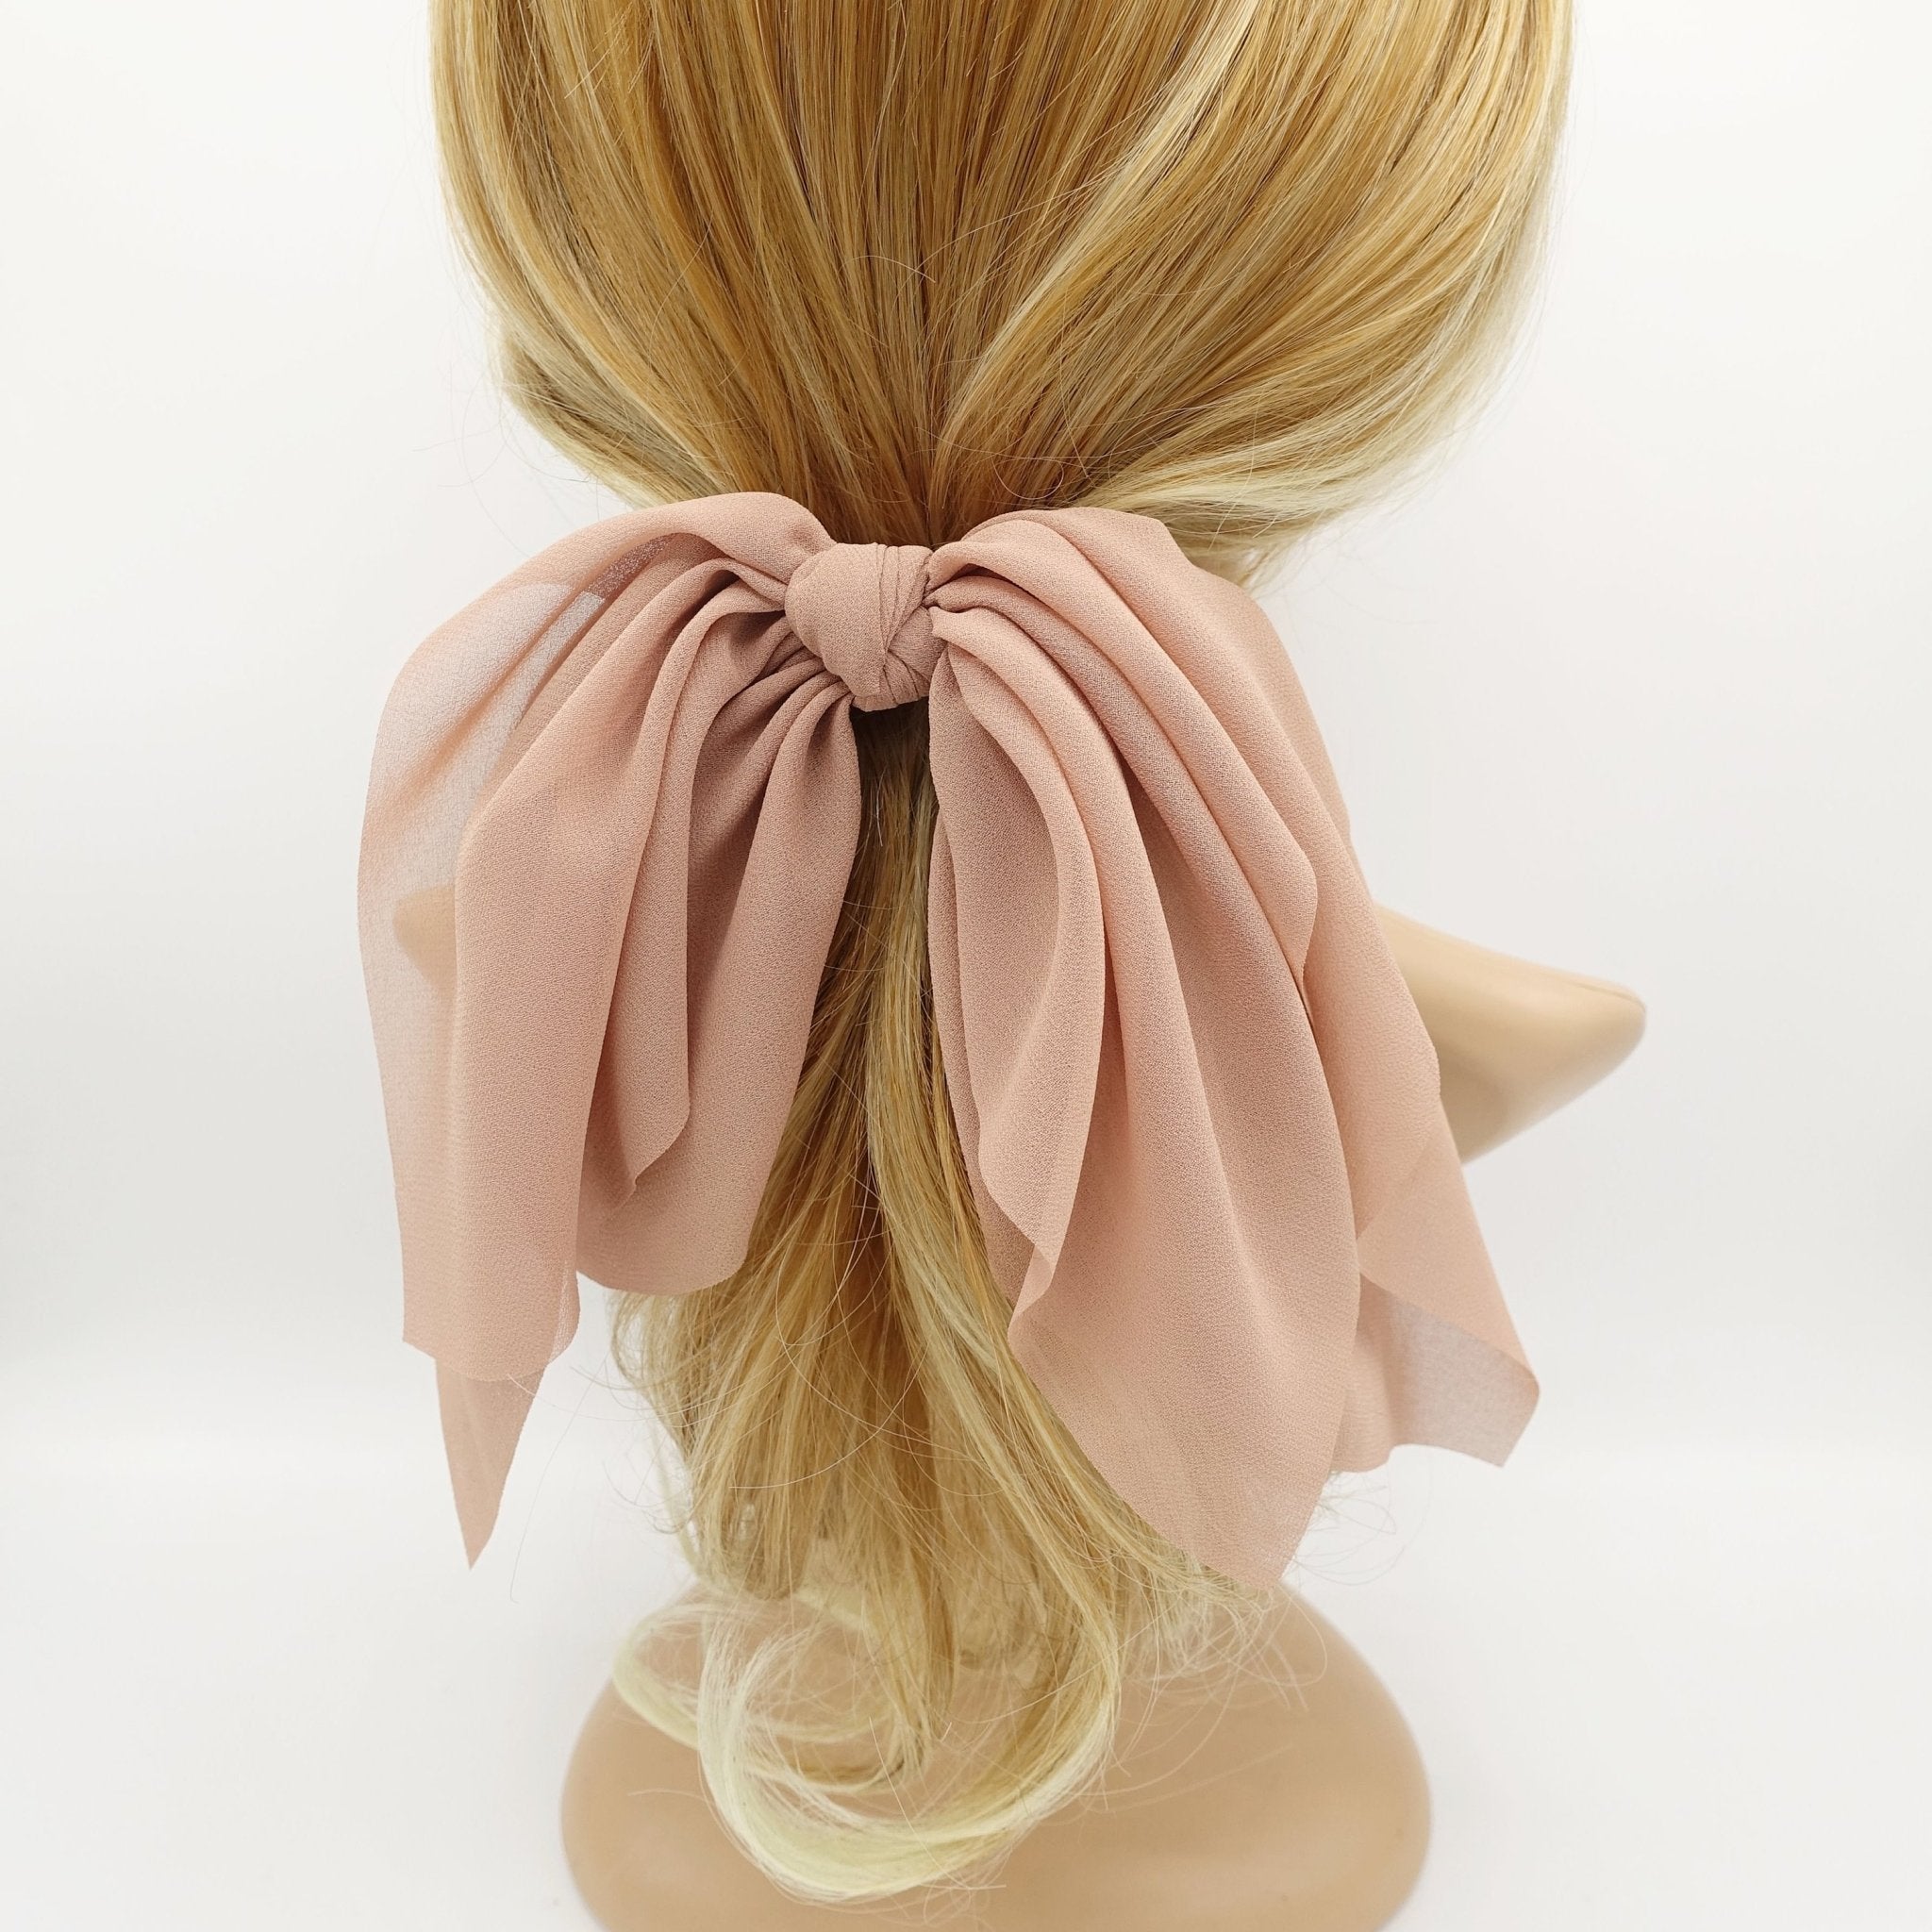 VeryShine chiffon layered hair bow solid color drape feminine style hair knotted bow french hair barrette